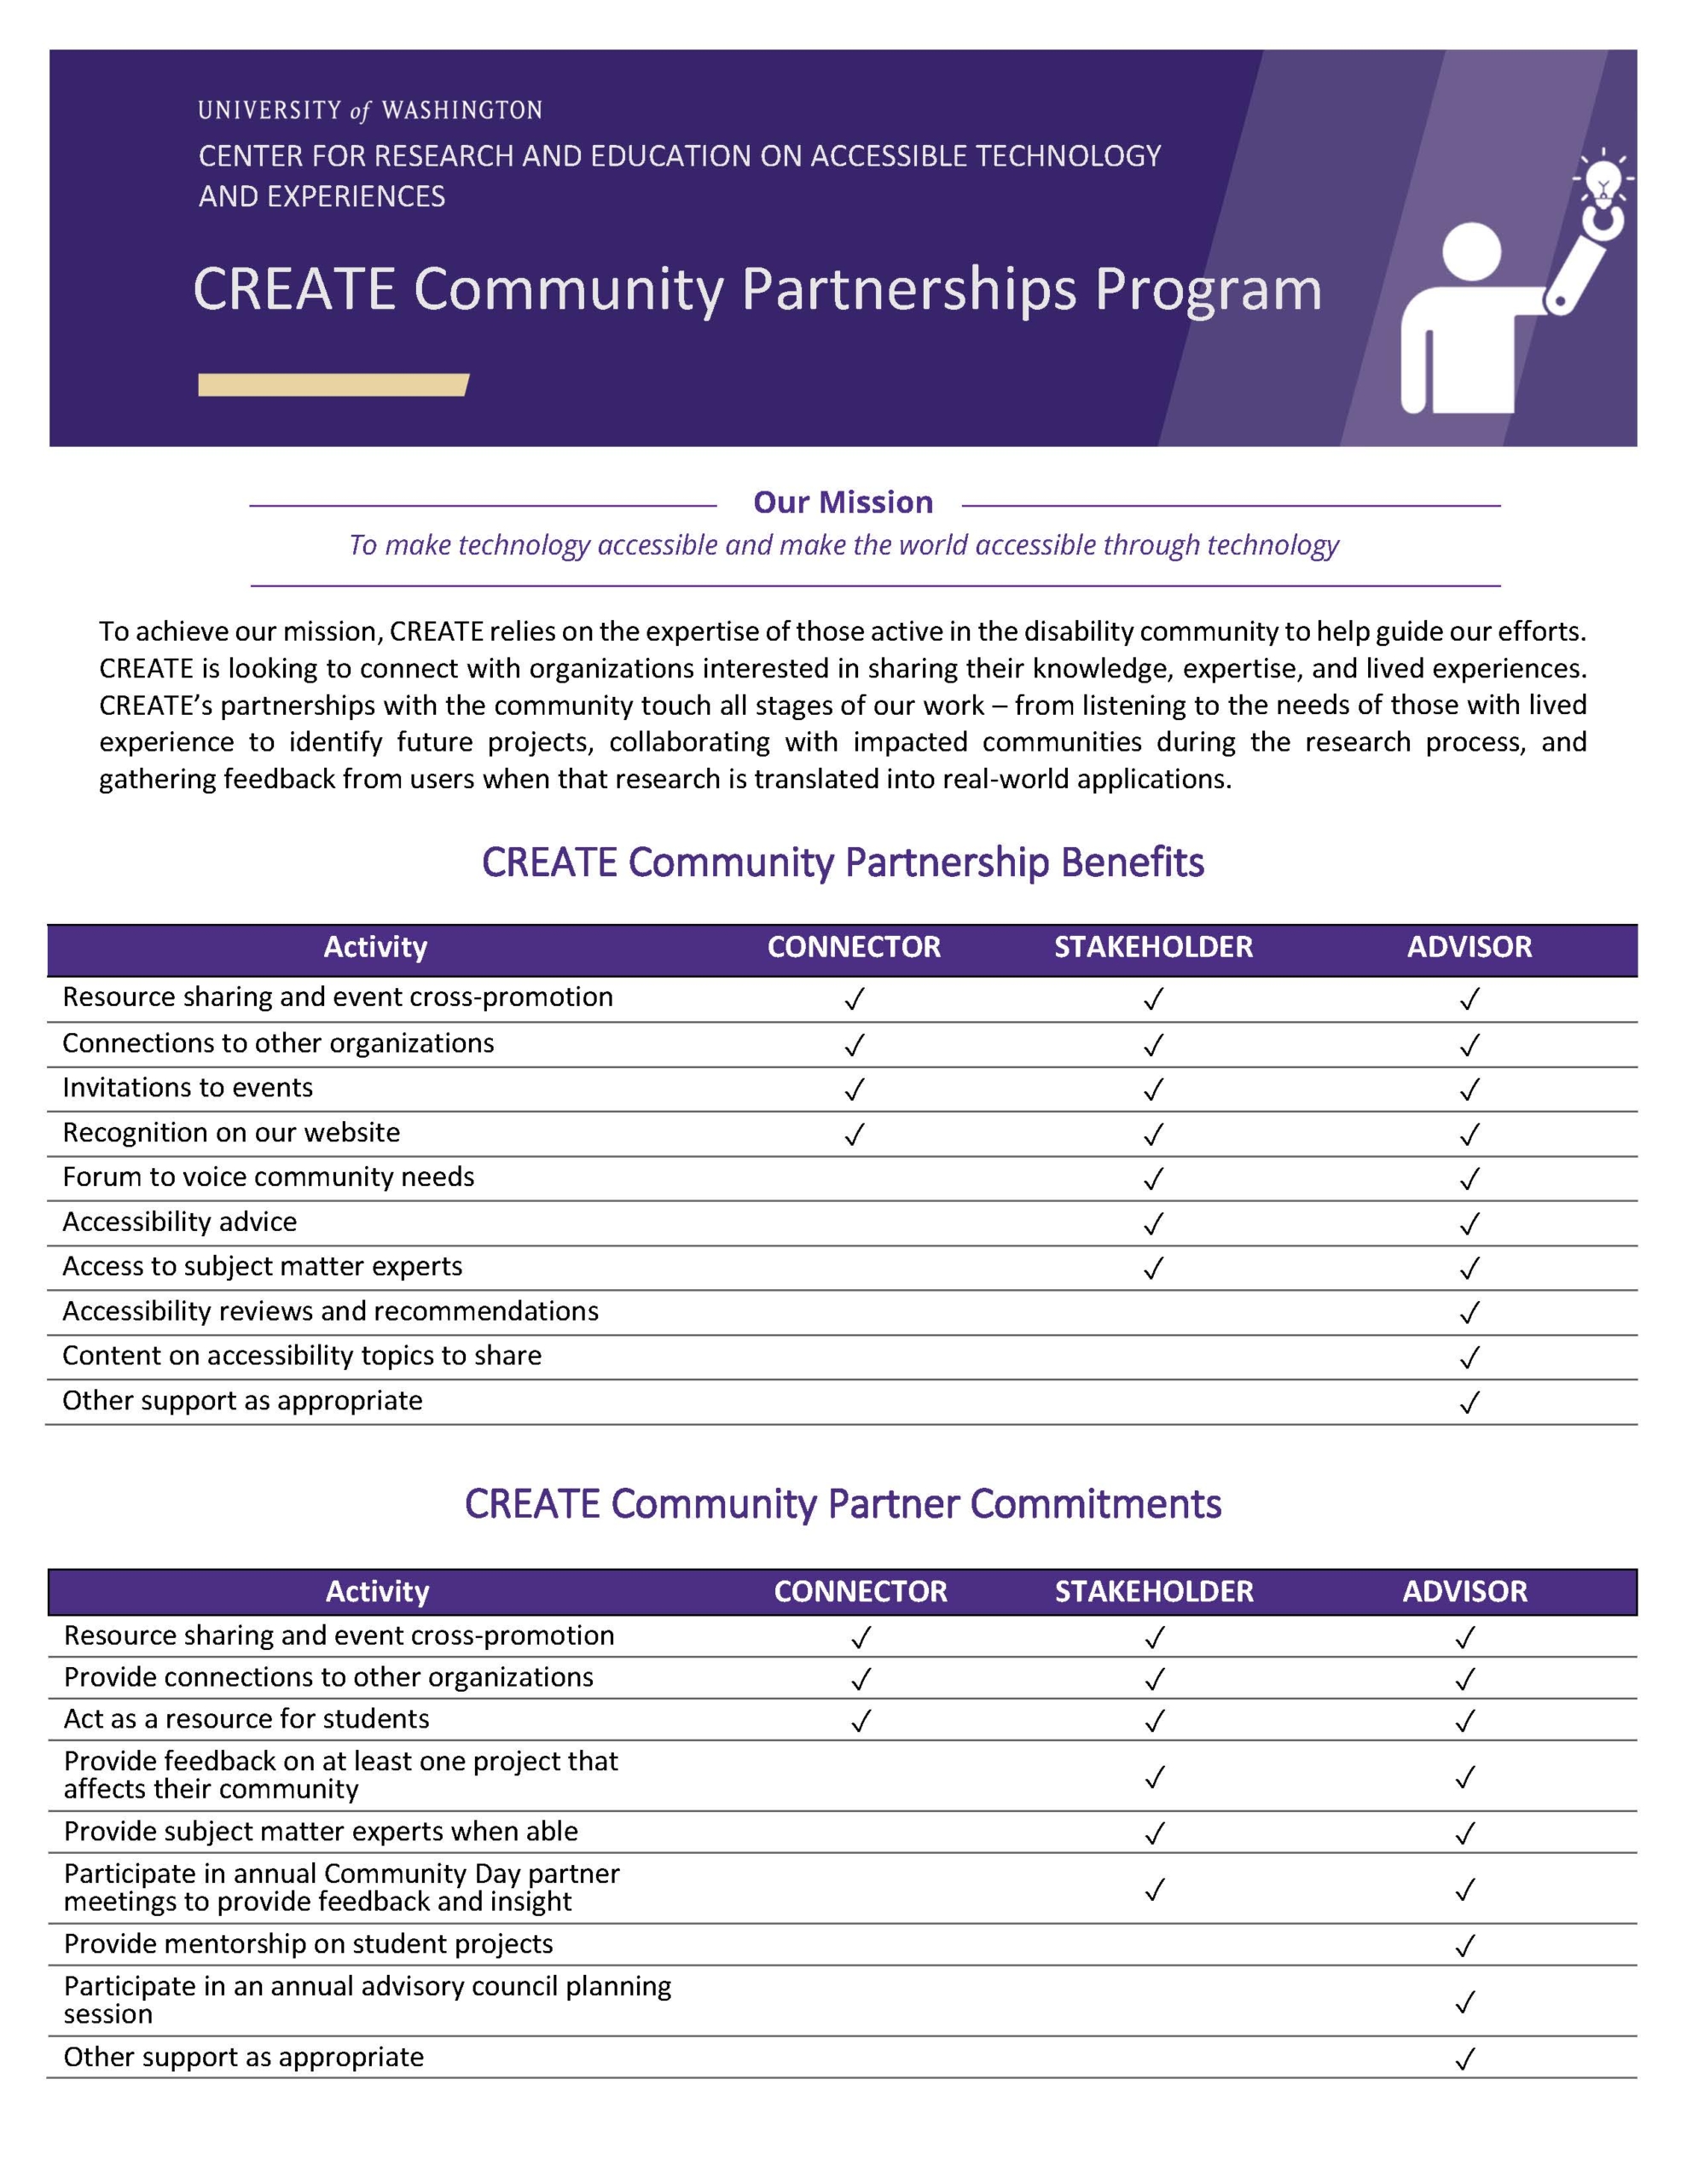 Image of a PDF listing the benefits of and commitments in community partnerships